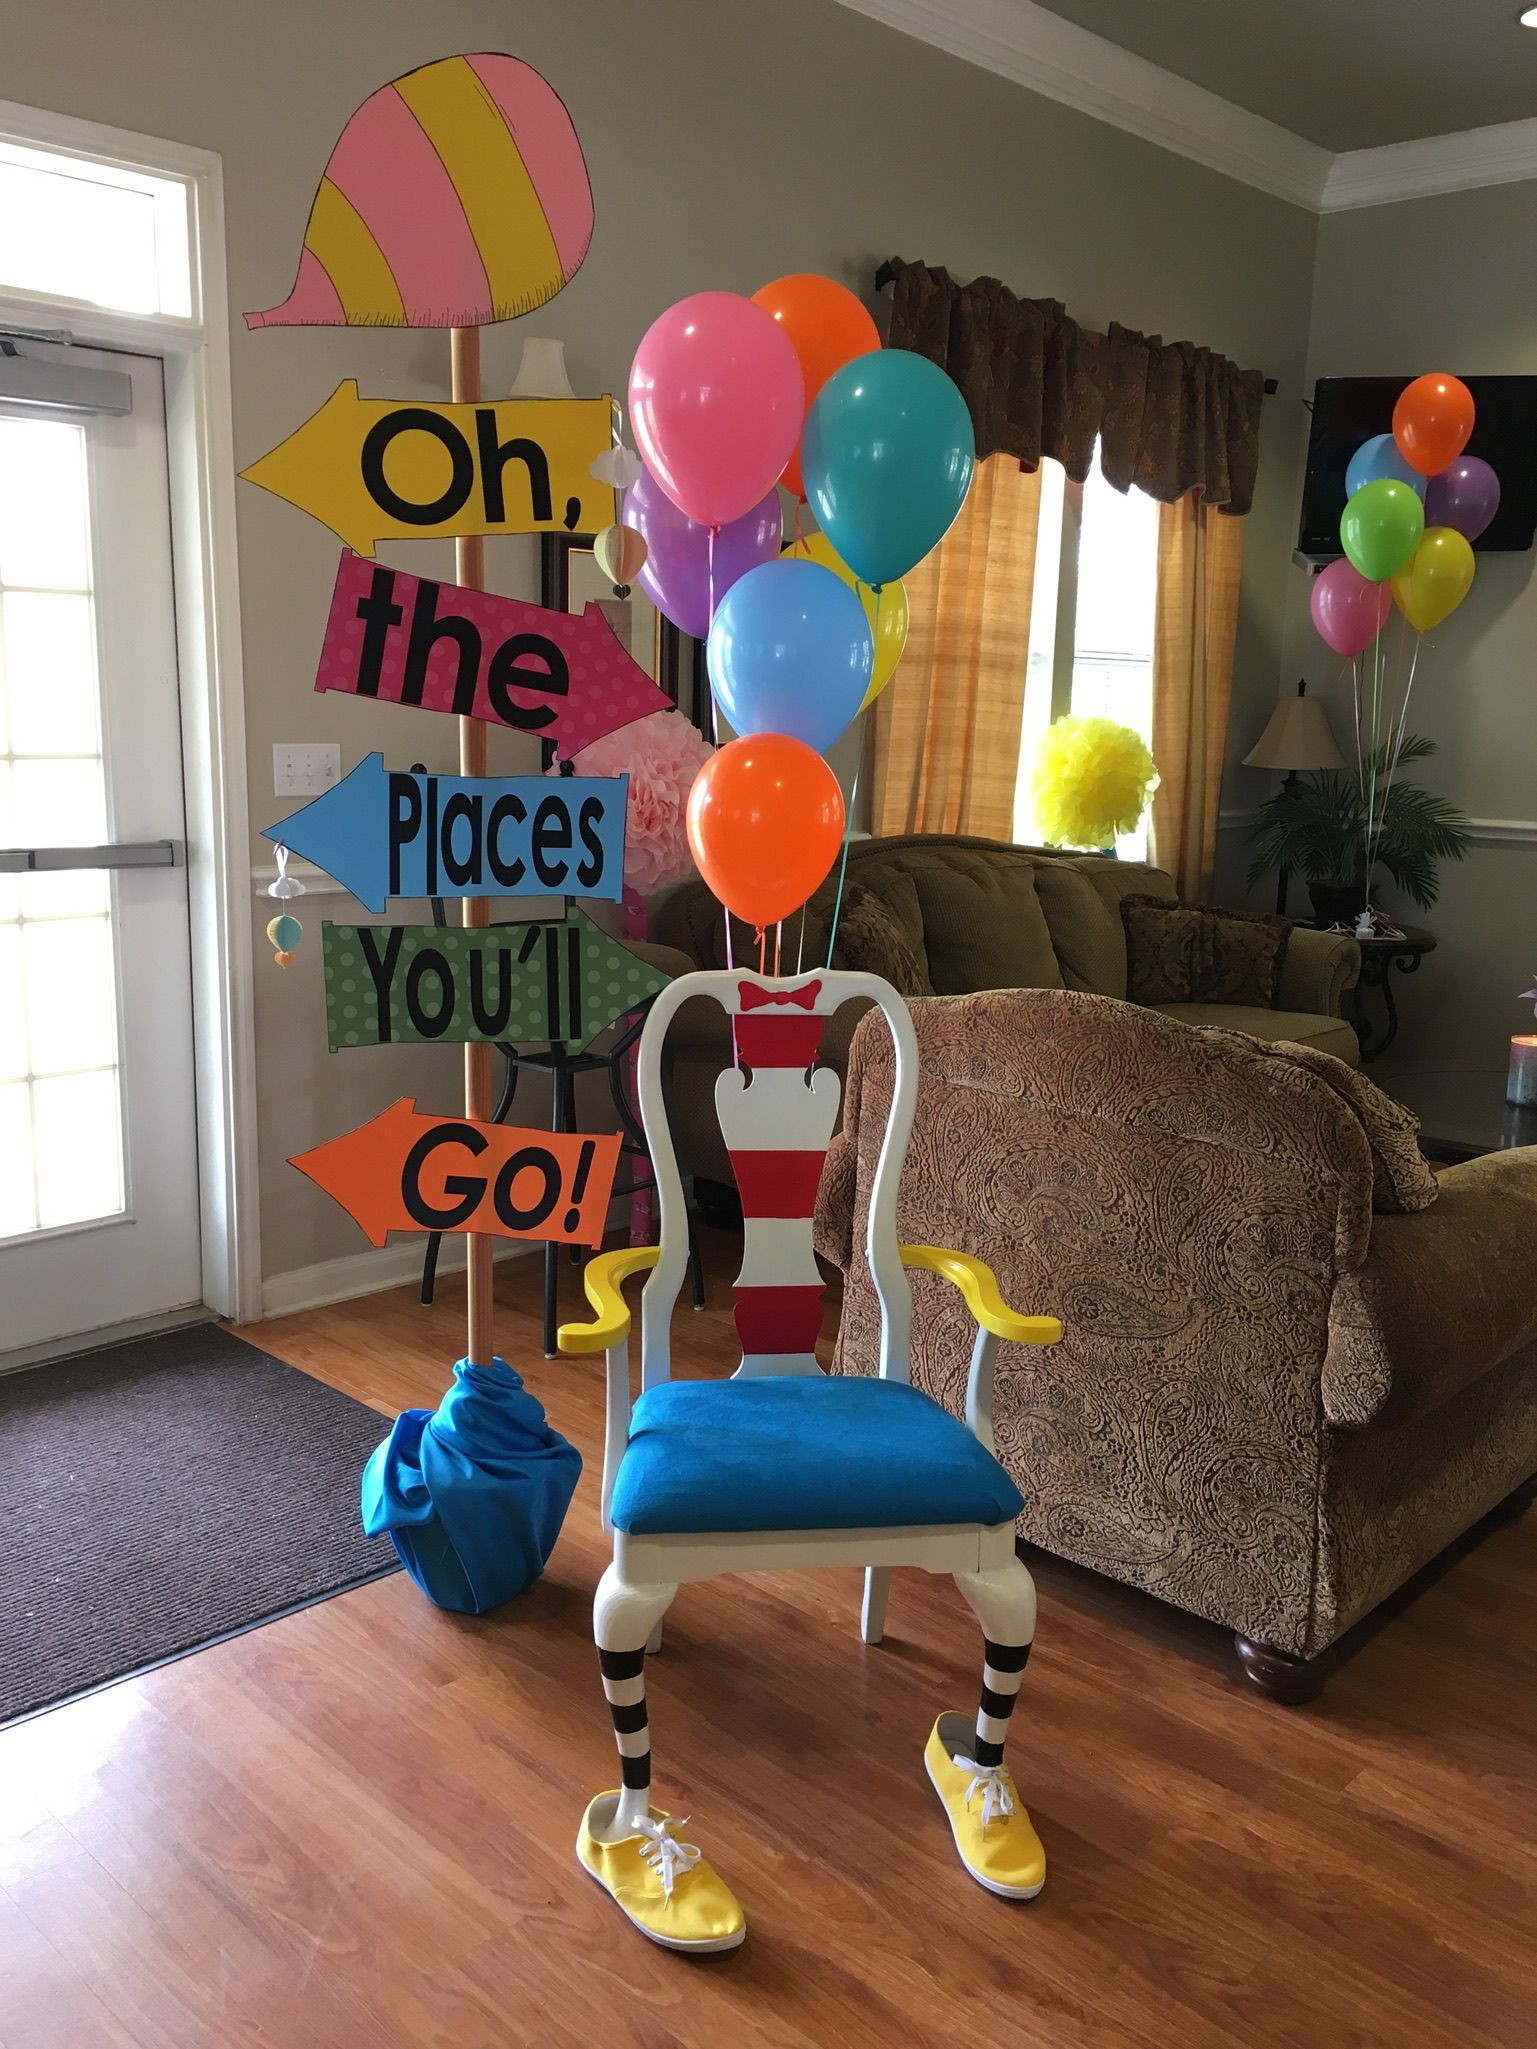 5Th Grade Graduation Party Theme Ideas
 Graduation party with "oh the places you ll go" theme